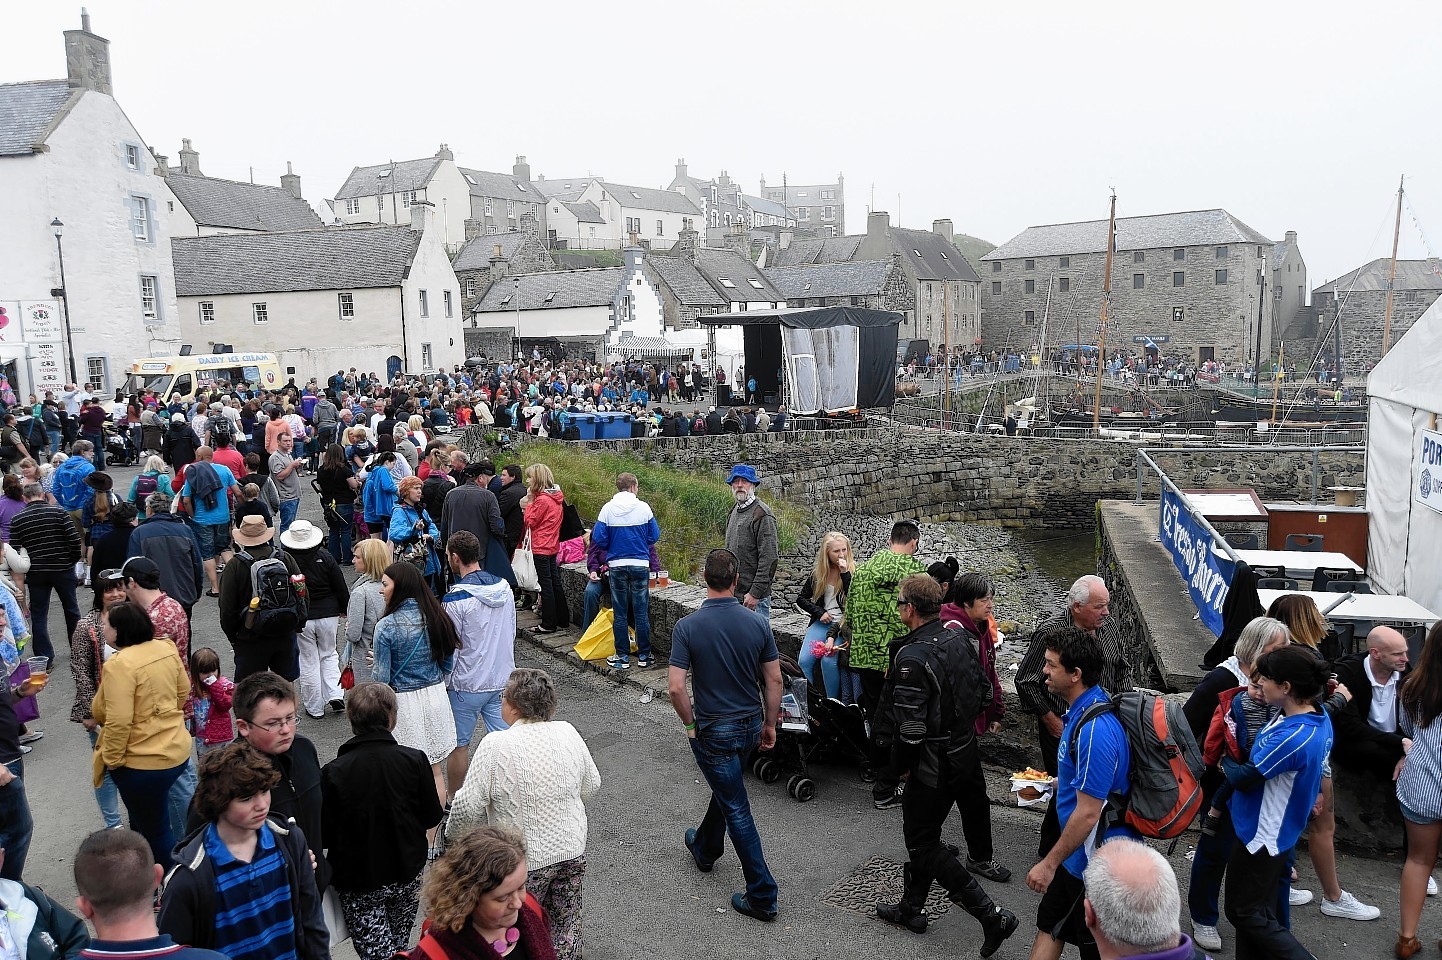 Portsoy during its annual boat festival